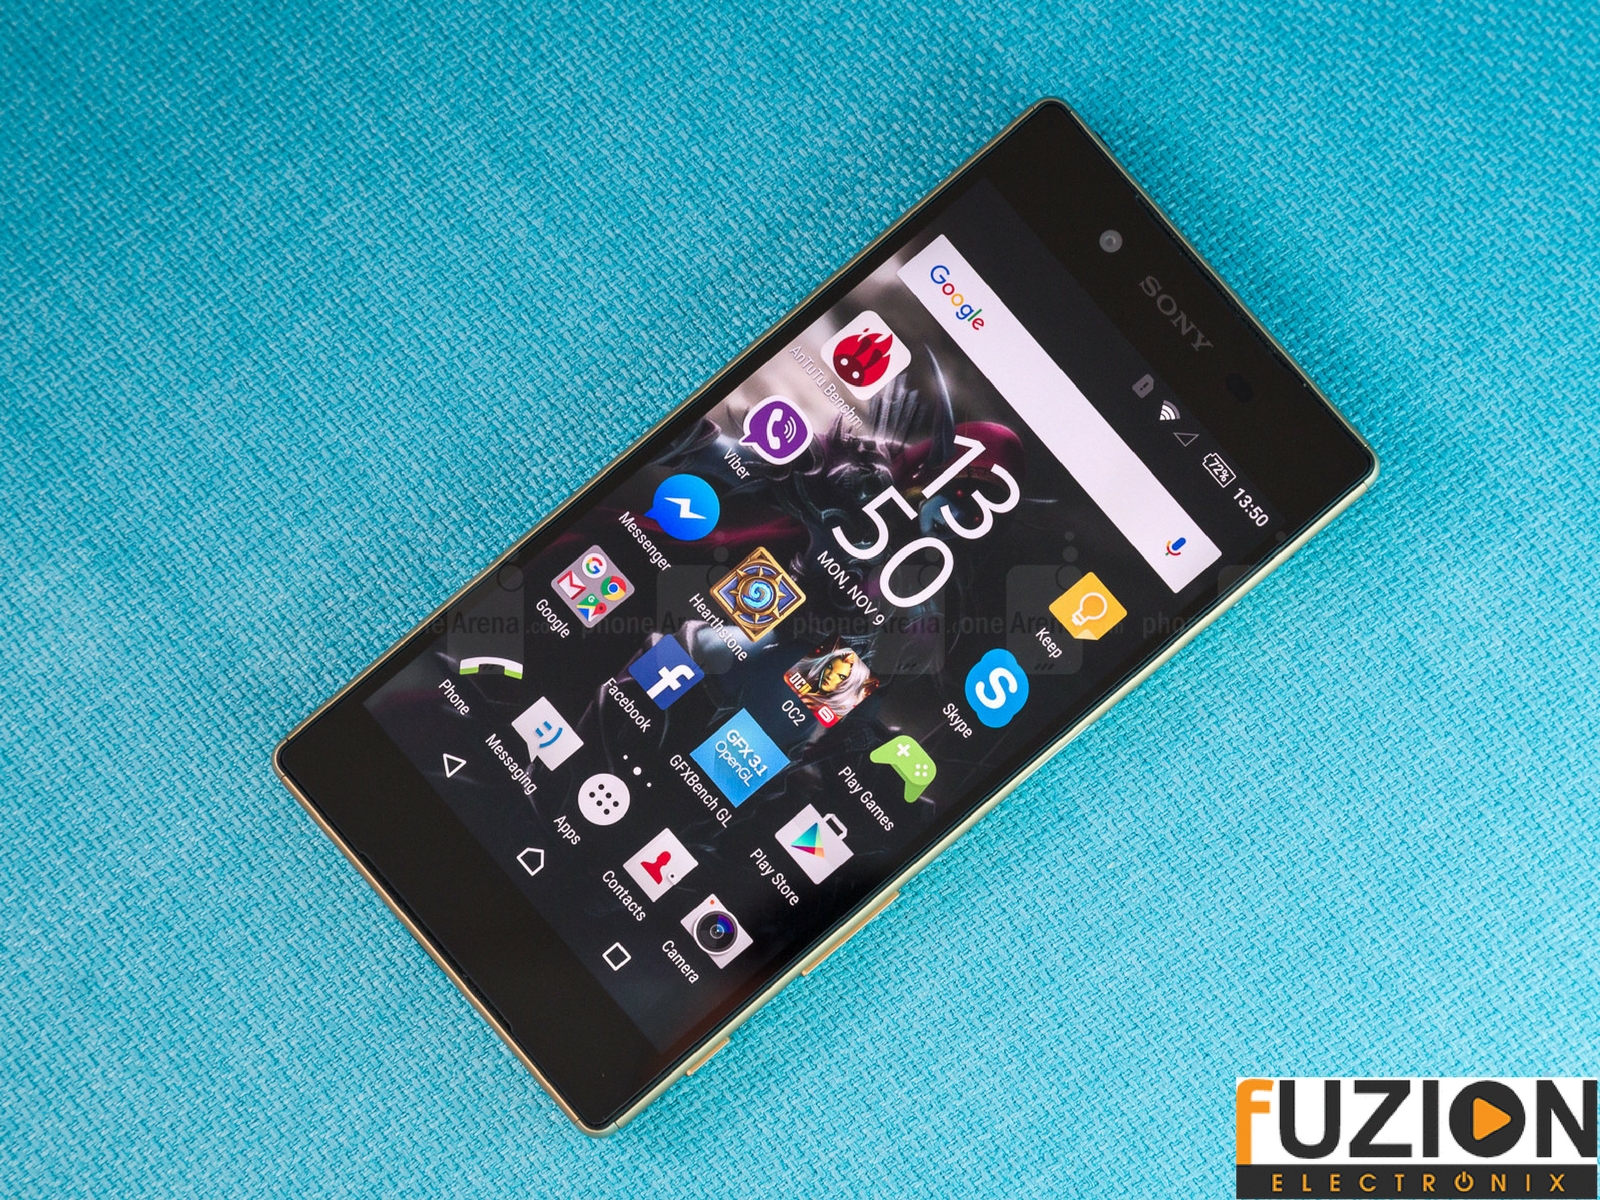 Sony Xperia X, Sony Xperia Z5 and Sony Xperia Z5 Premium: Smartphones that will win your hearts! 